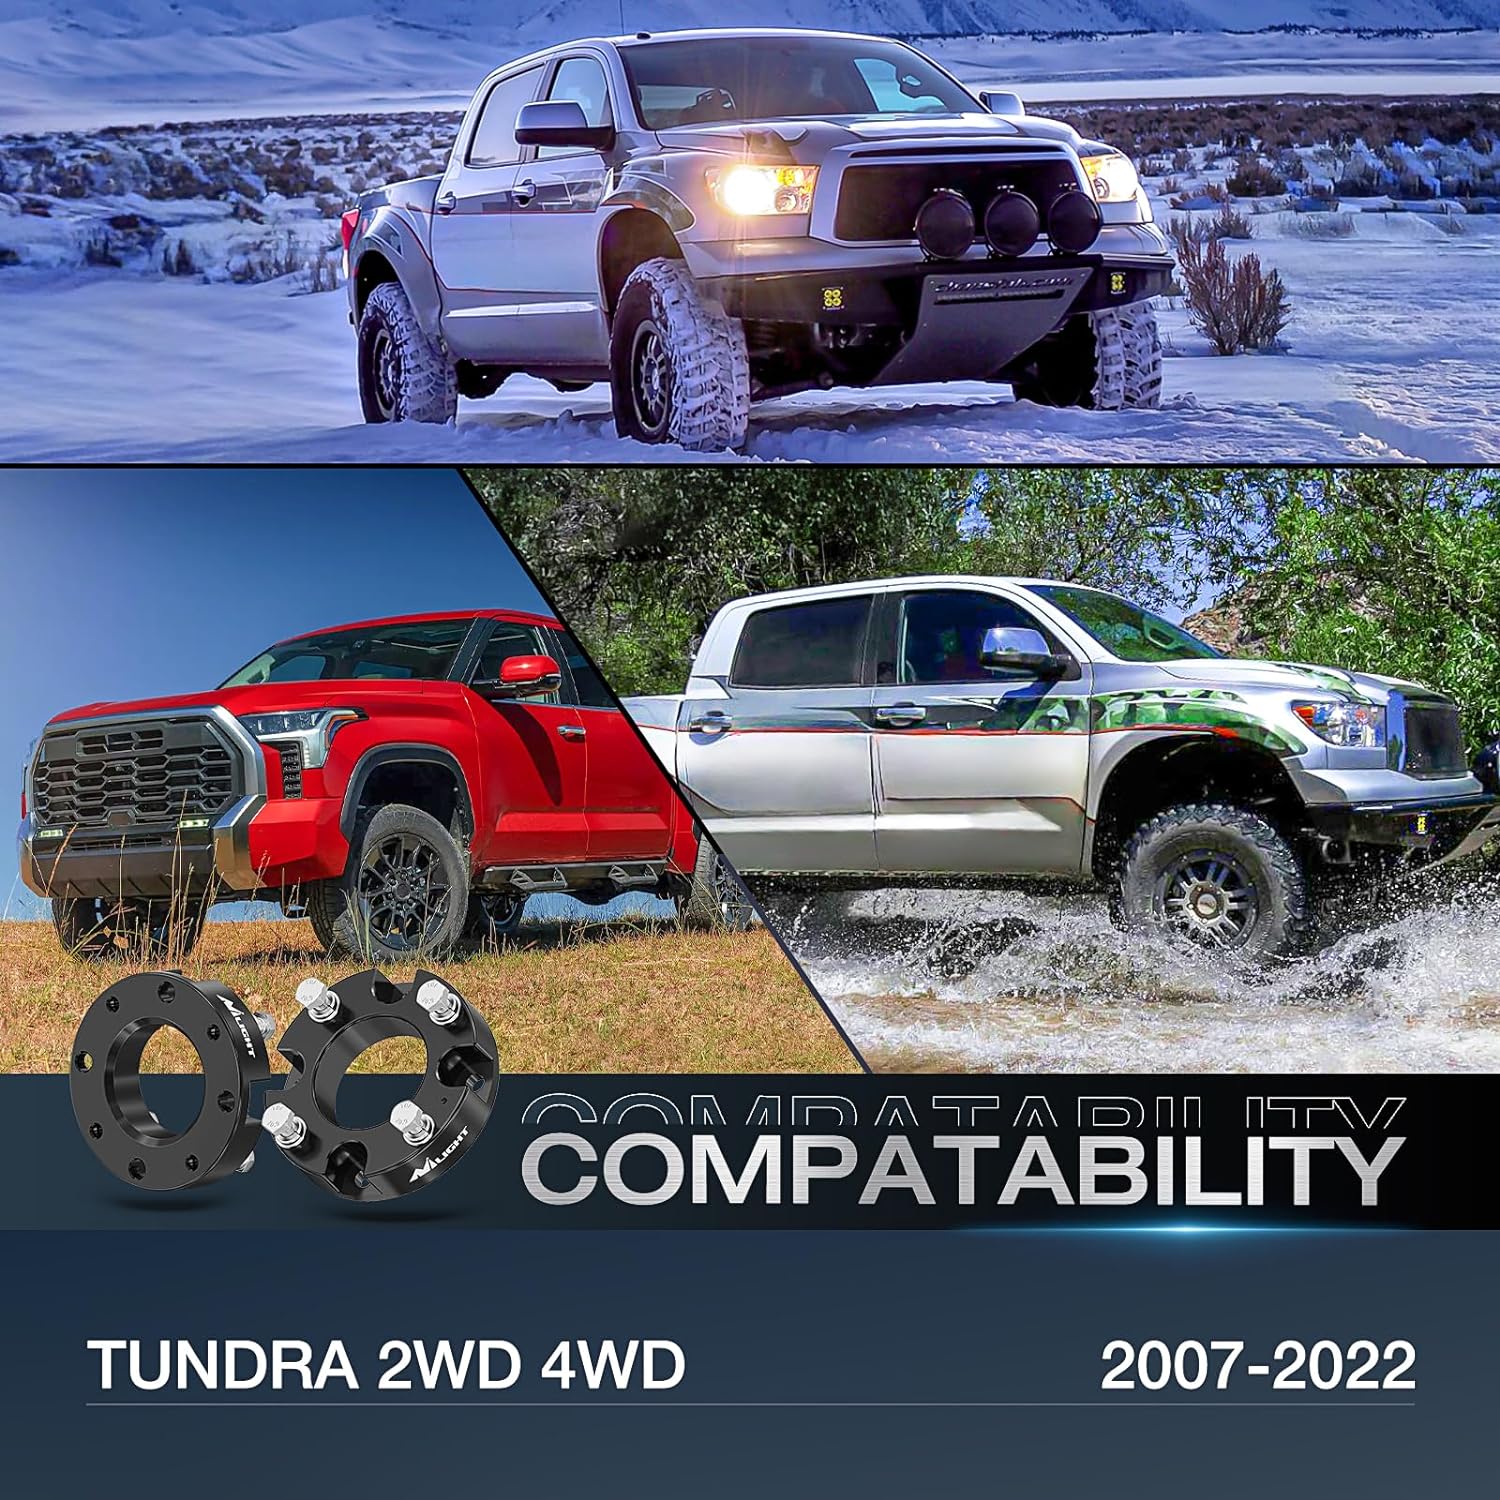 2" Tundra Leveling Lift Kit for 4x4 4x2 2007-2022 TUNDRA 2WD 4WD Front Raise Suspension Strut Spacers Nilight